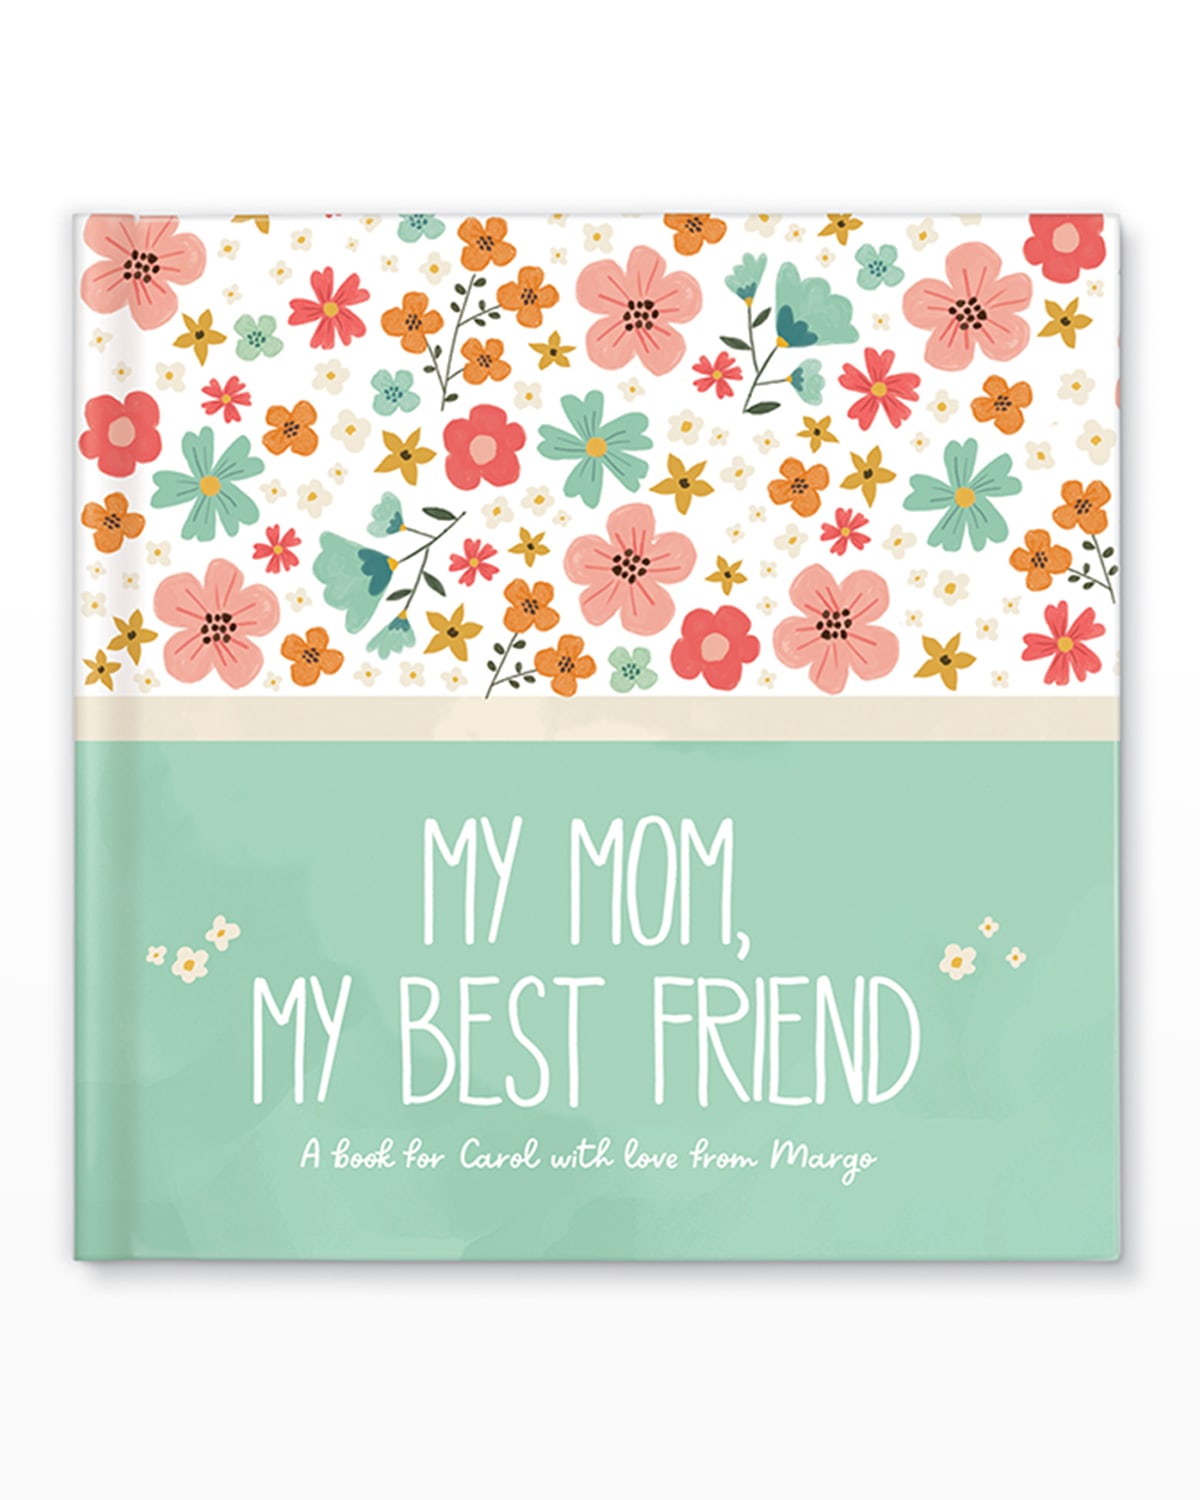 I See Me My Mom, My Best Friend Personalized Book By Caroline Burns In Multi